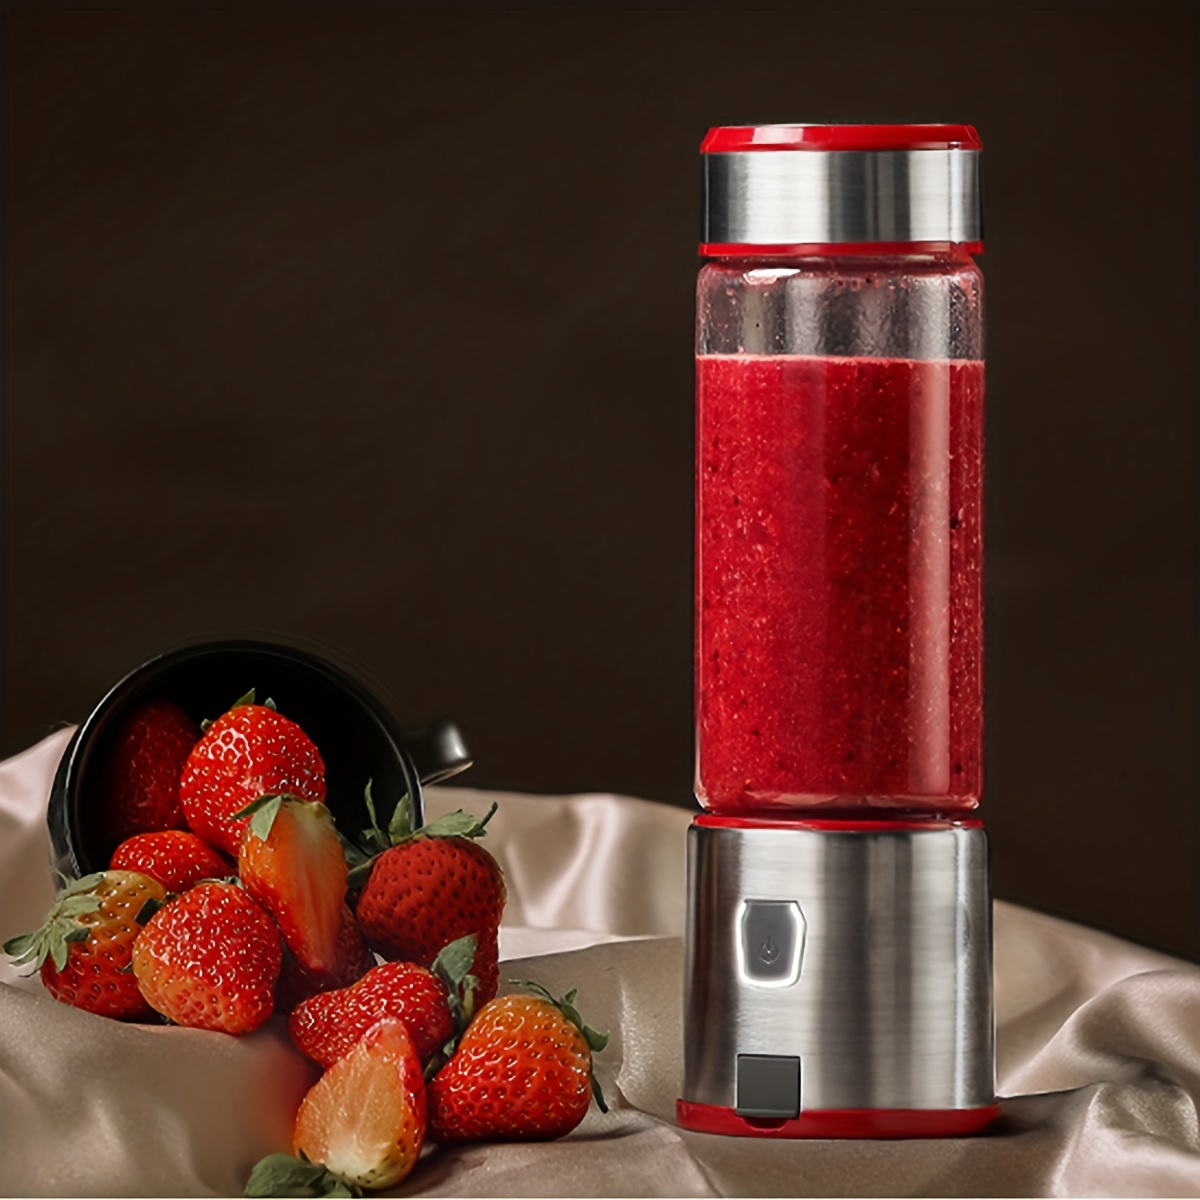 380ml Automatic Self Stirring Cup Coffee Milk Fruits Mixing Mug Blender USB  Rechargeable Electric Stainless Steel Thermal Cup